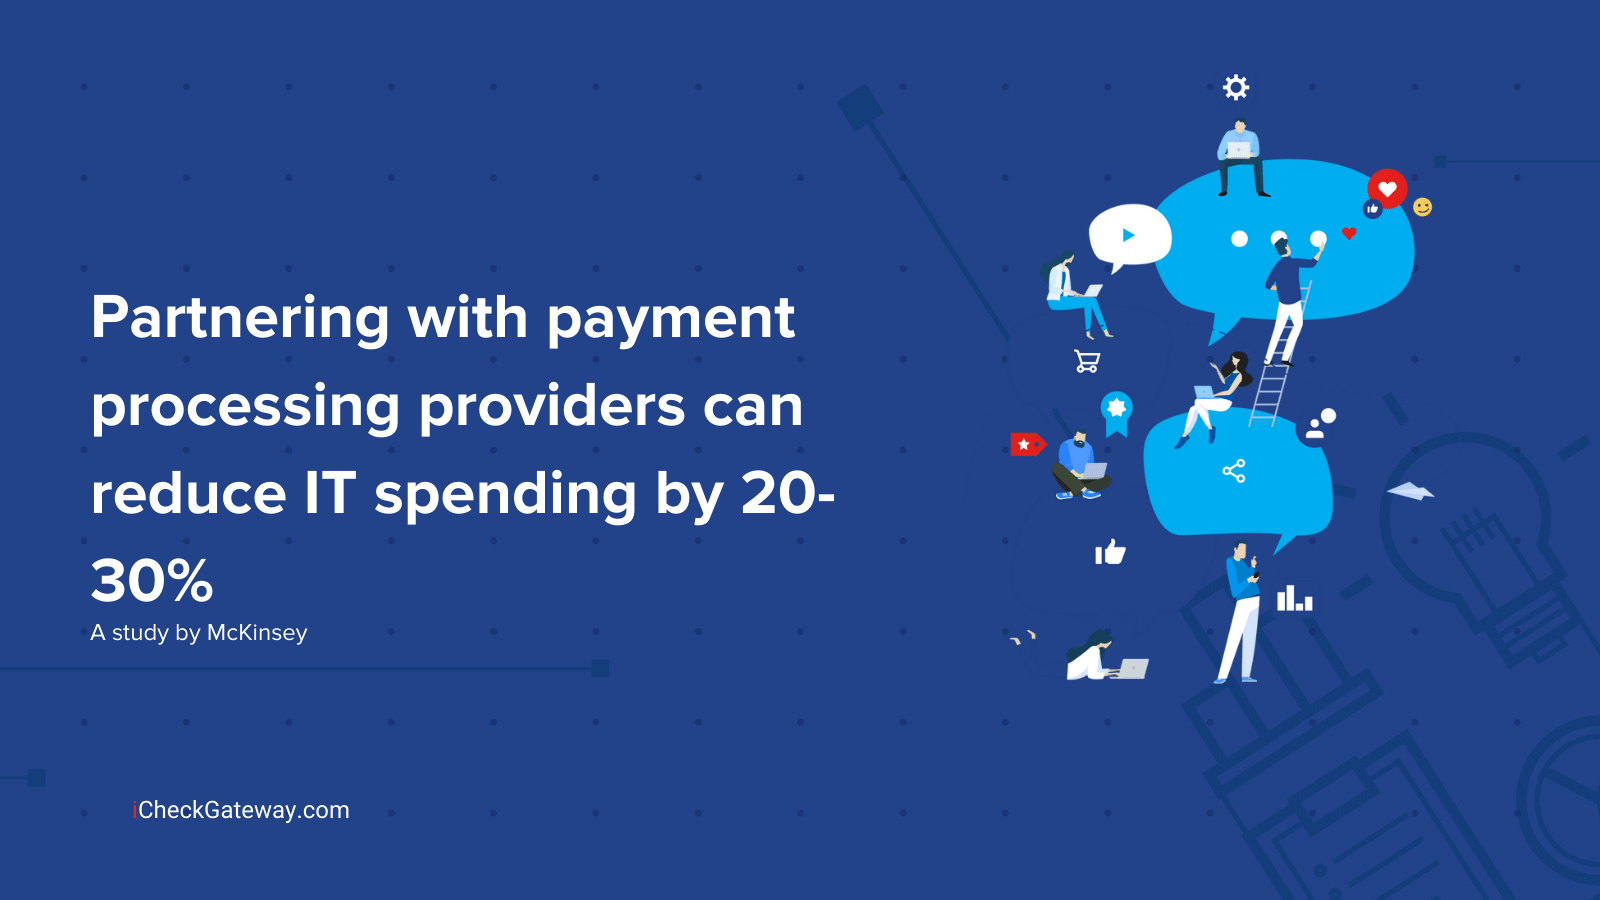 A study by McKinsey shows partnering with payment processing providers can reduce IT spending by 20-30%